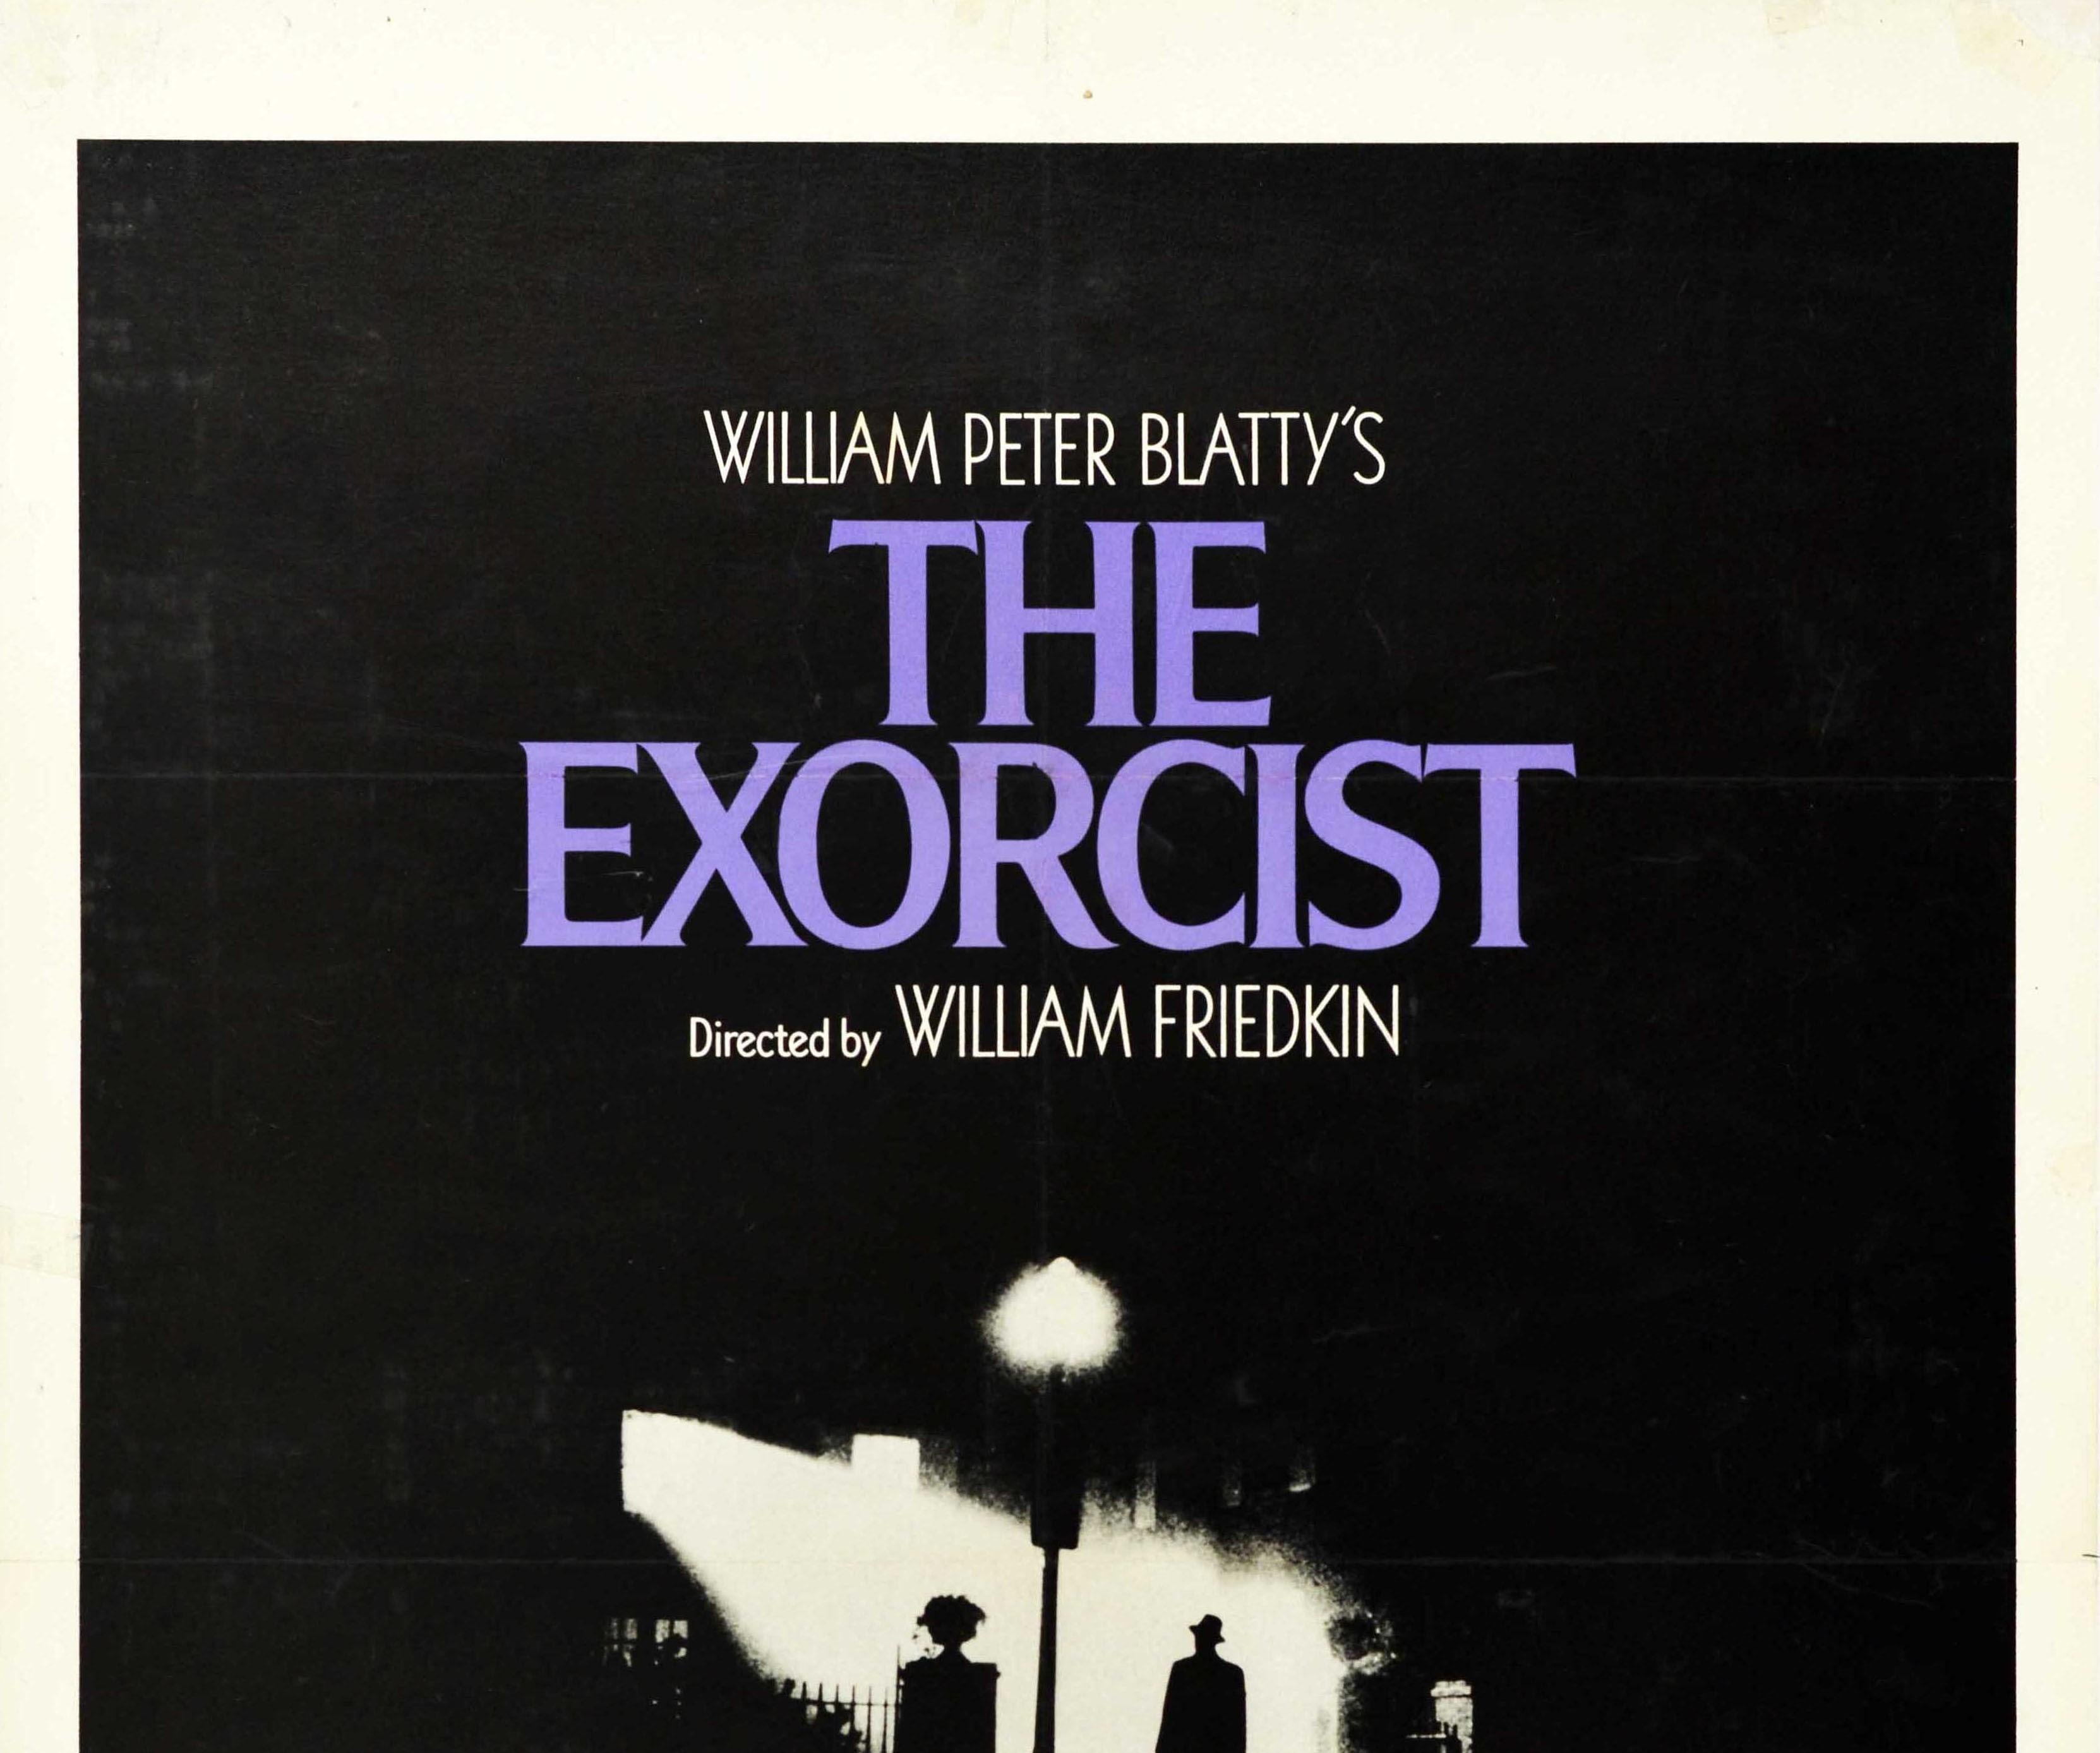 Original vintage movie poster for the award winning X rated supernatural horror film The Exorcist adapted by William Peter Blatty from his 1971 novel inspired by the 1949 exorcism of Roland Doe, directed by William Friedkin and starring Ellen